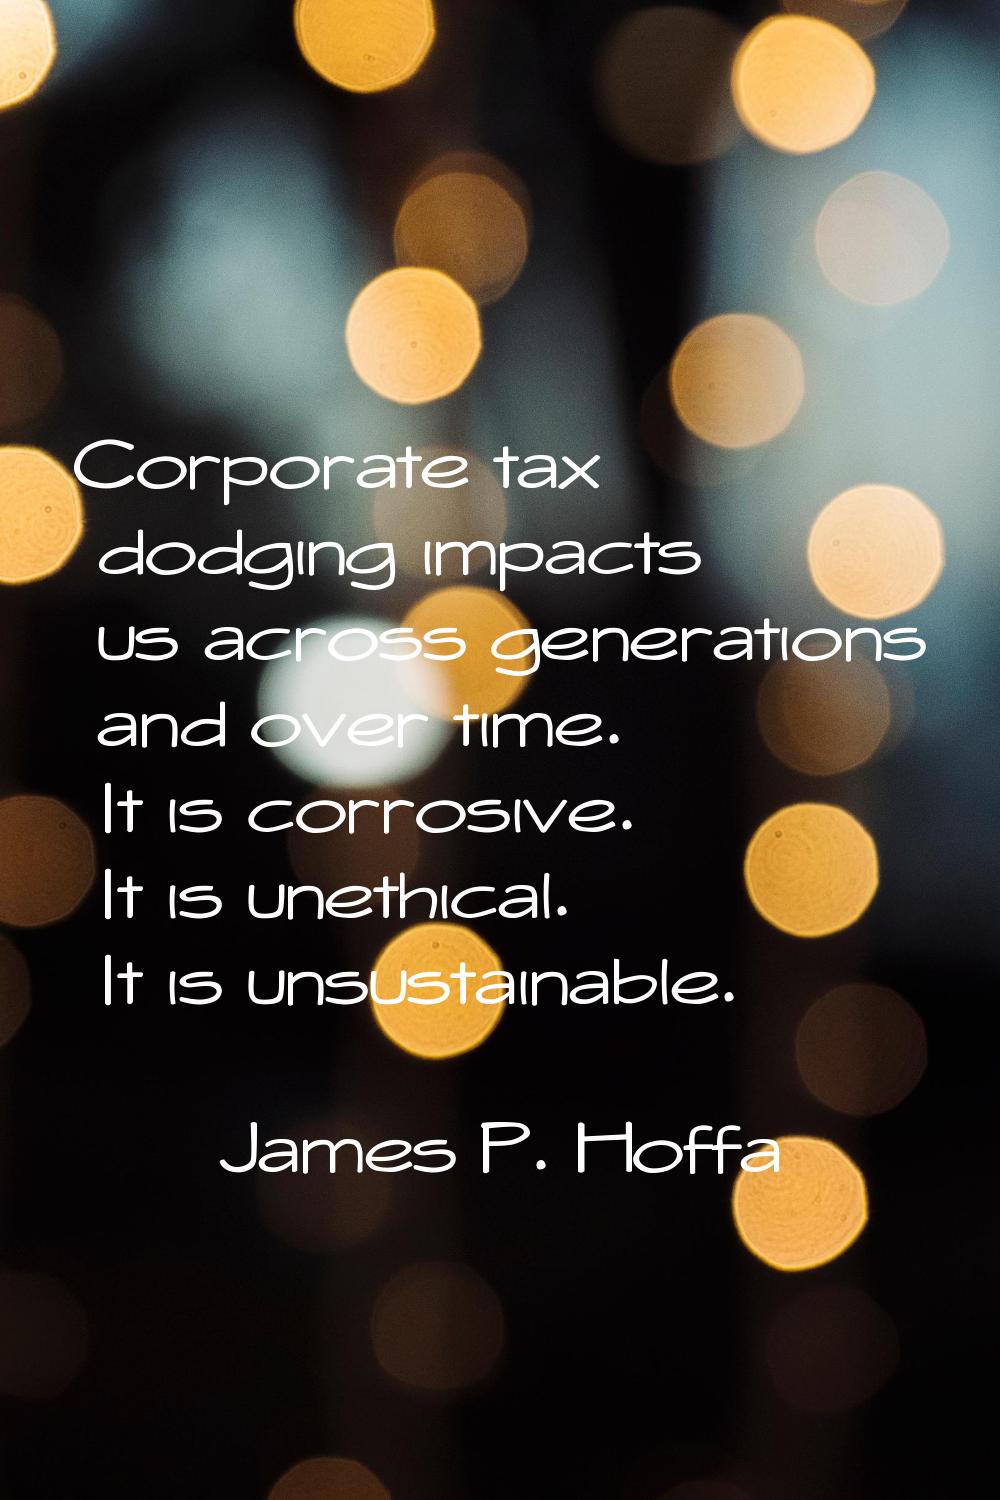 Corporate tax dodging impacts us across generations and over time. It is corrosive. It is unethical